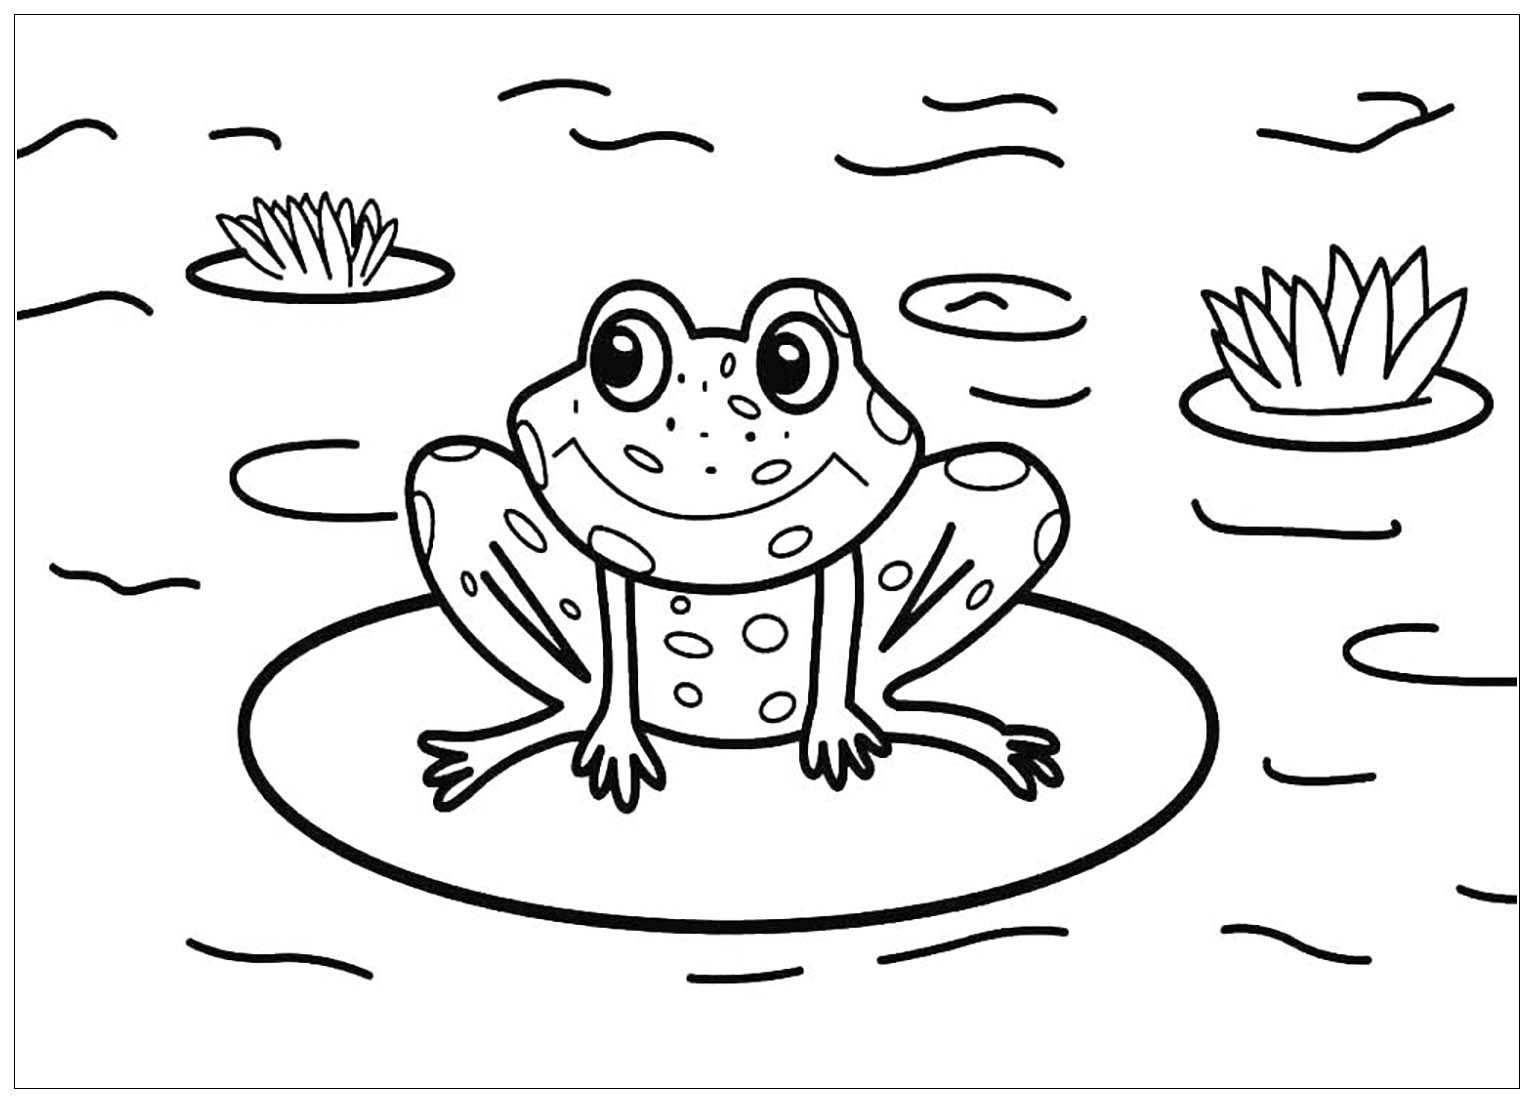 Frog Coloring Pages For Kids
 Frogs for kids Frogs Kids Coloring Pages